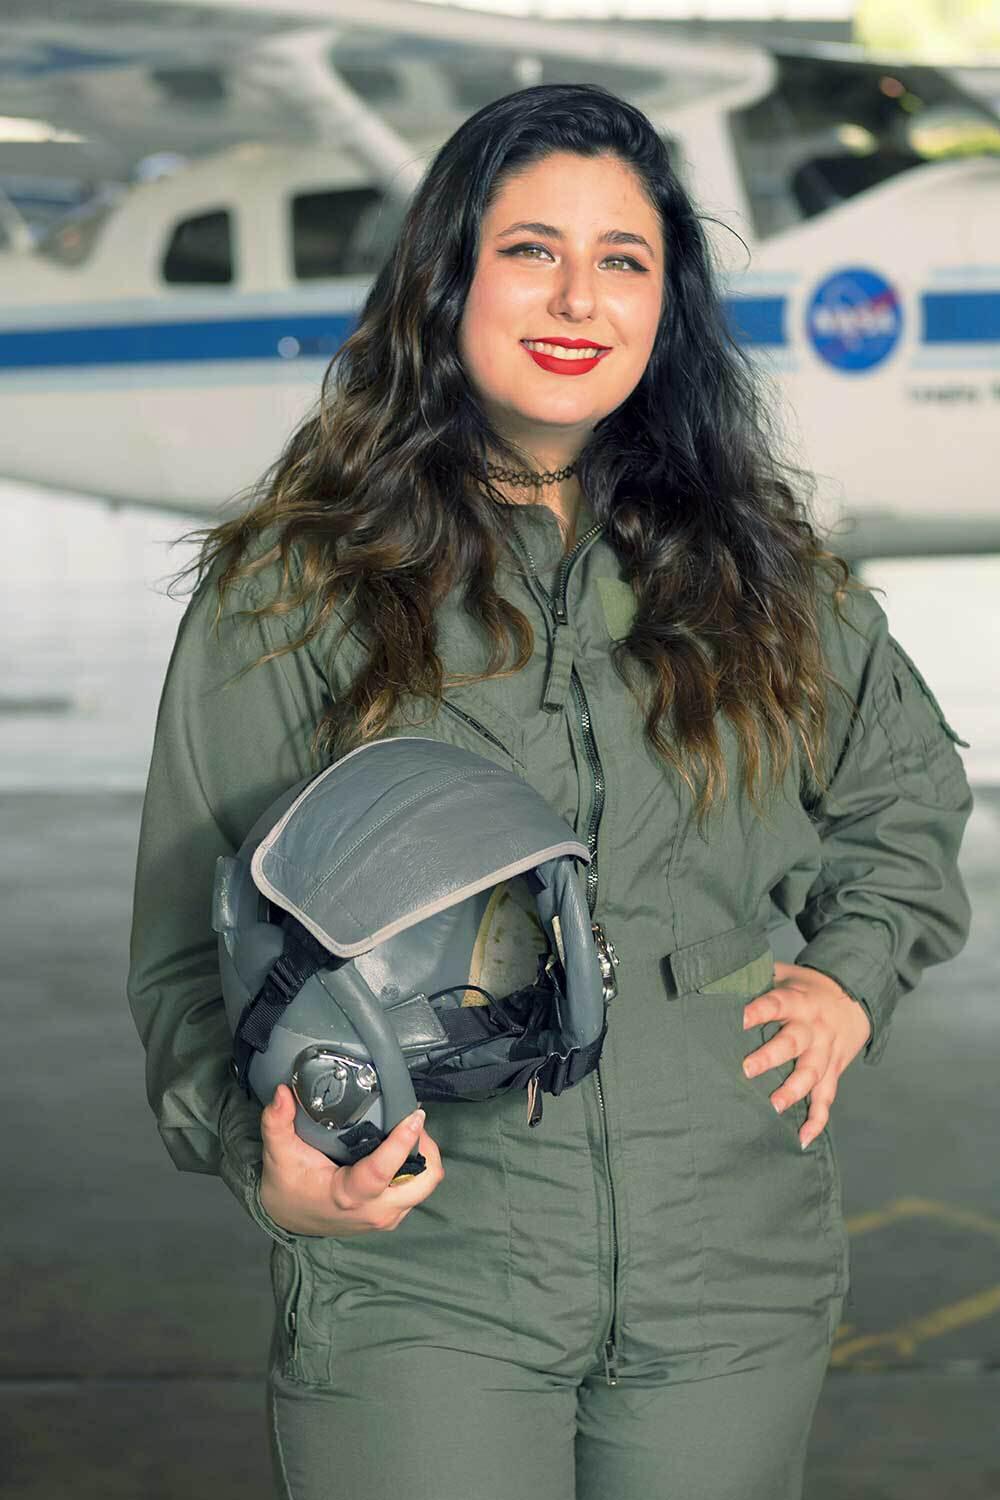 Lilly Balderson wearing a flight jumpsuit and holding a helmet.